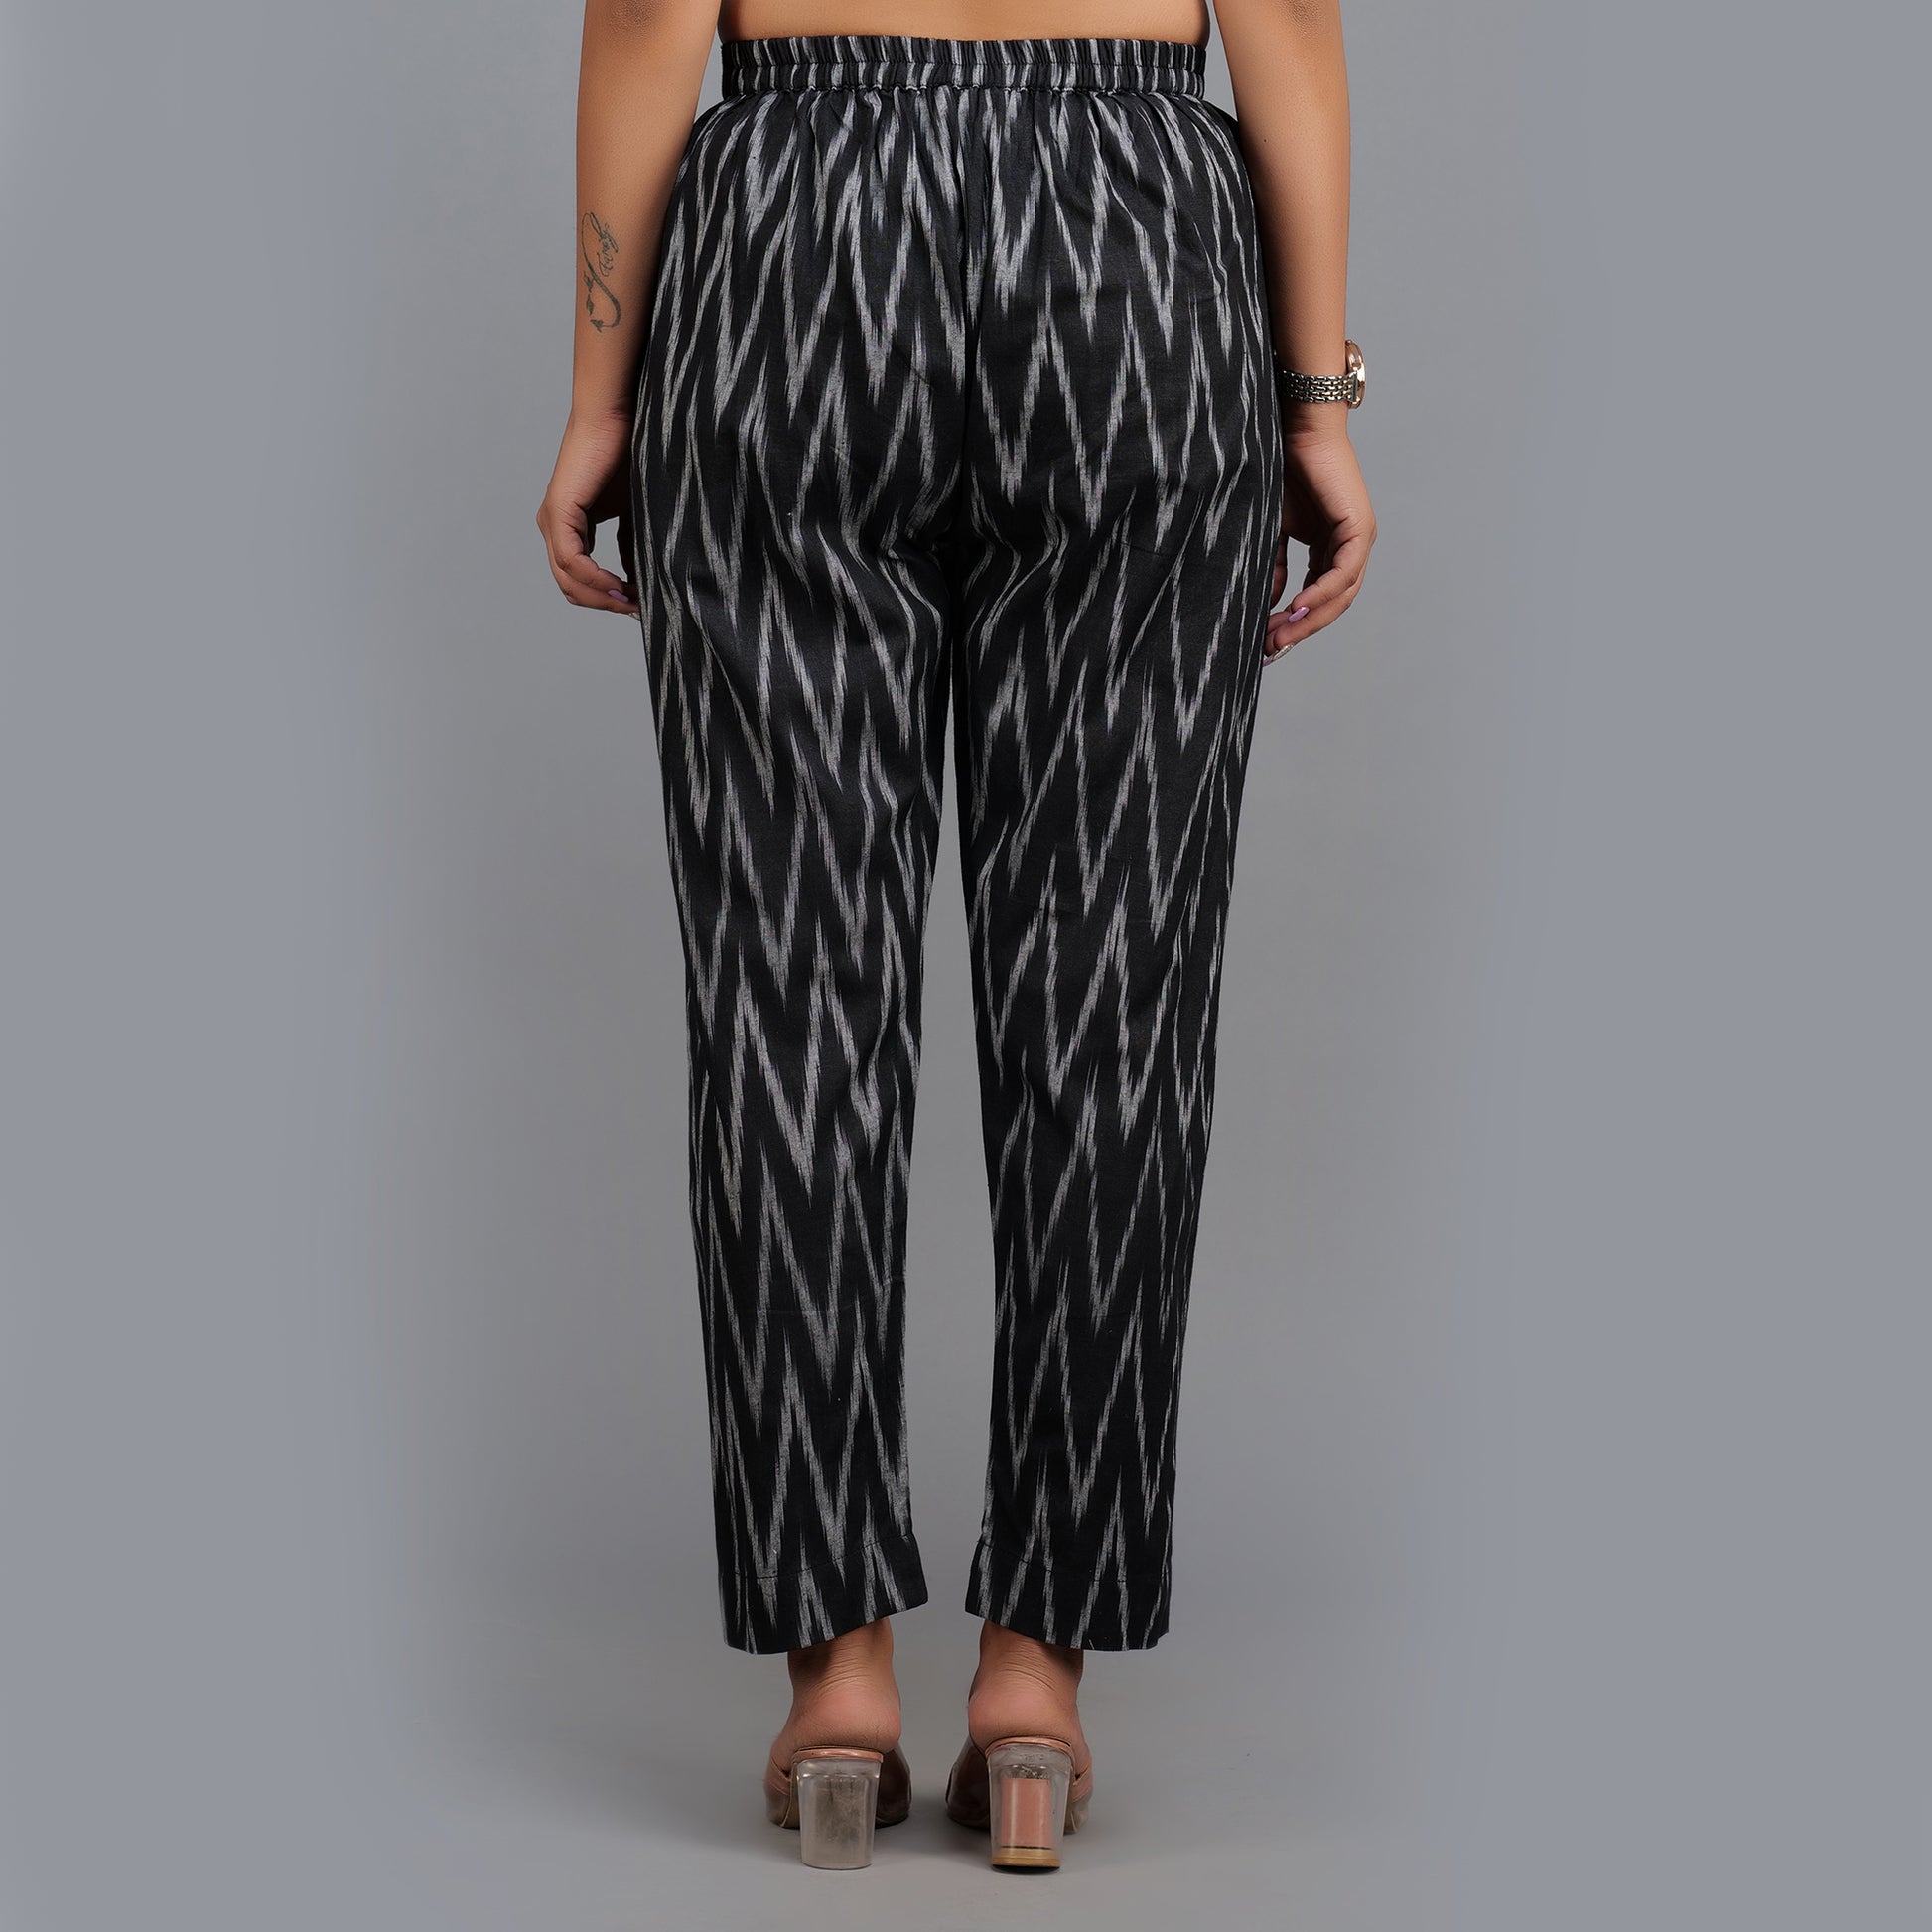 Black pants for Ladies Ikat pants with pockets